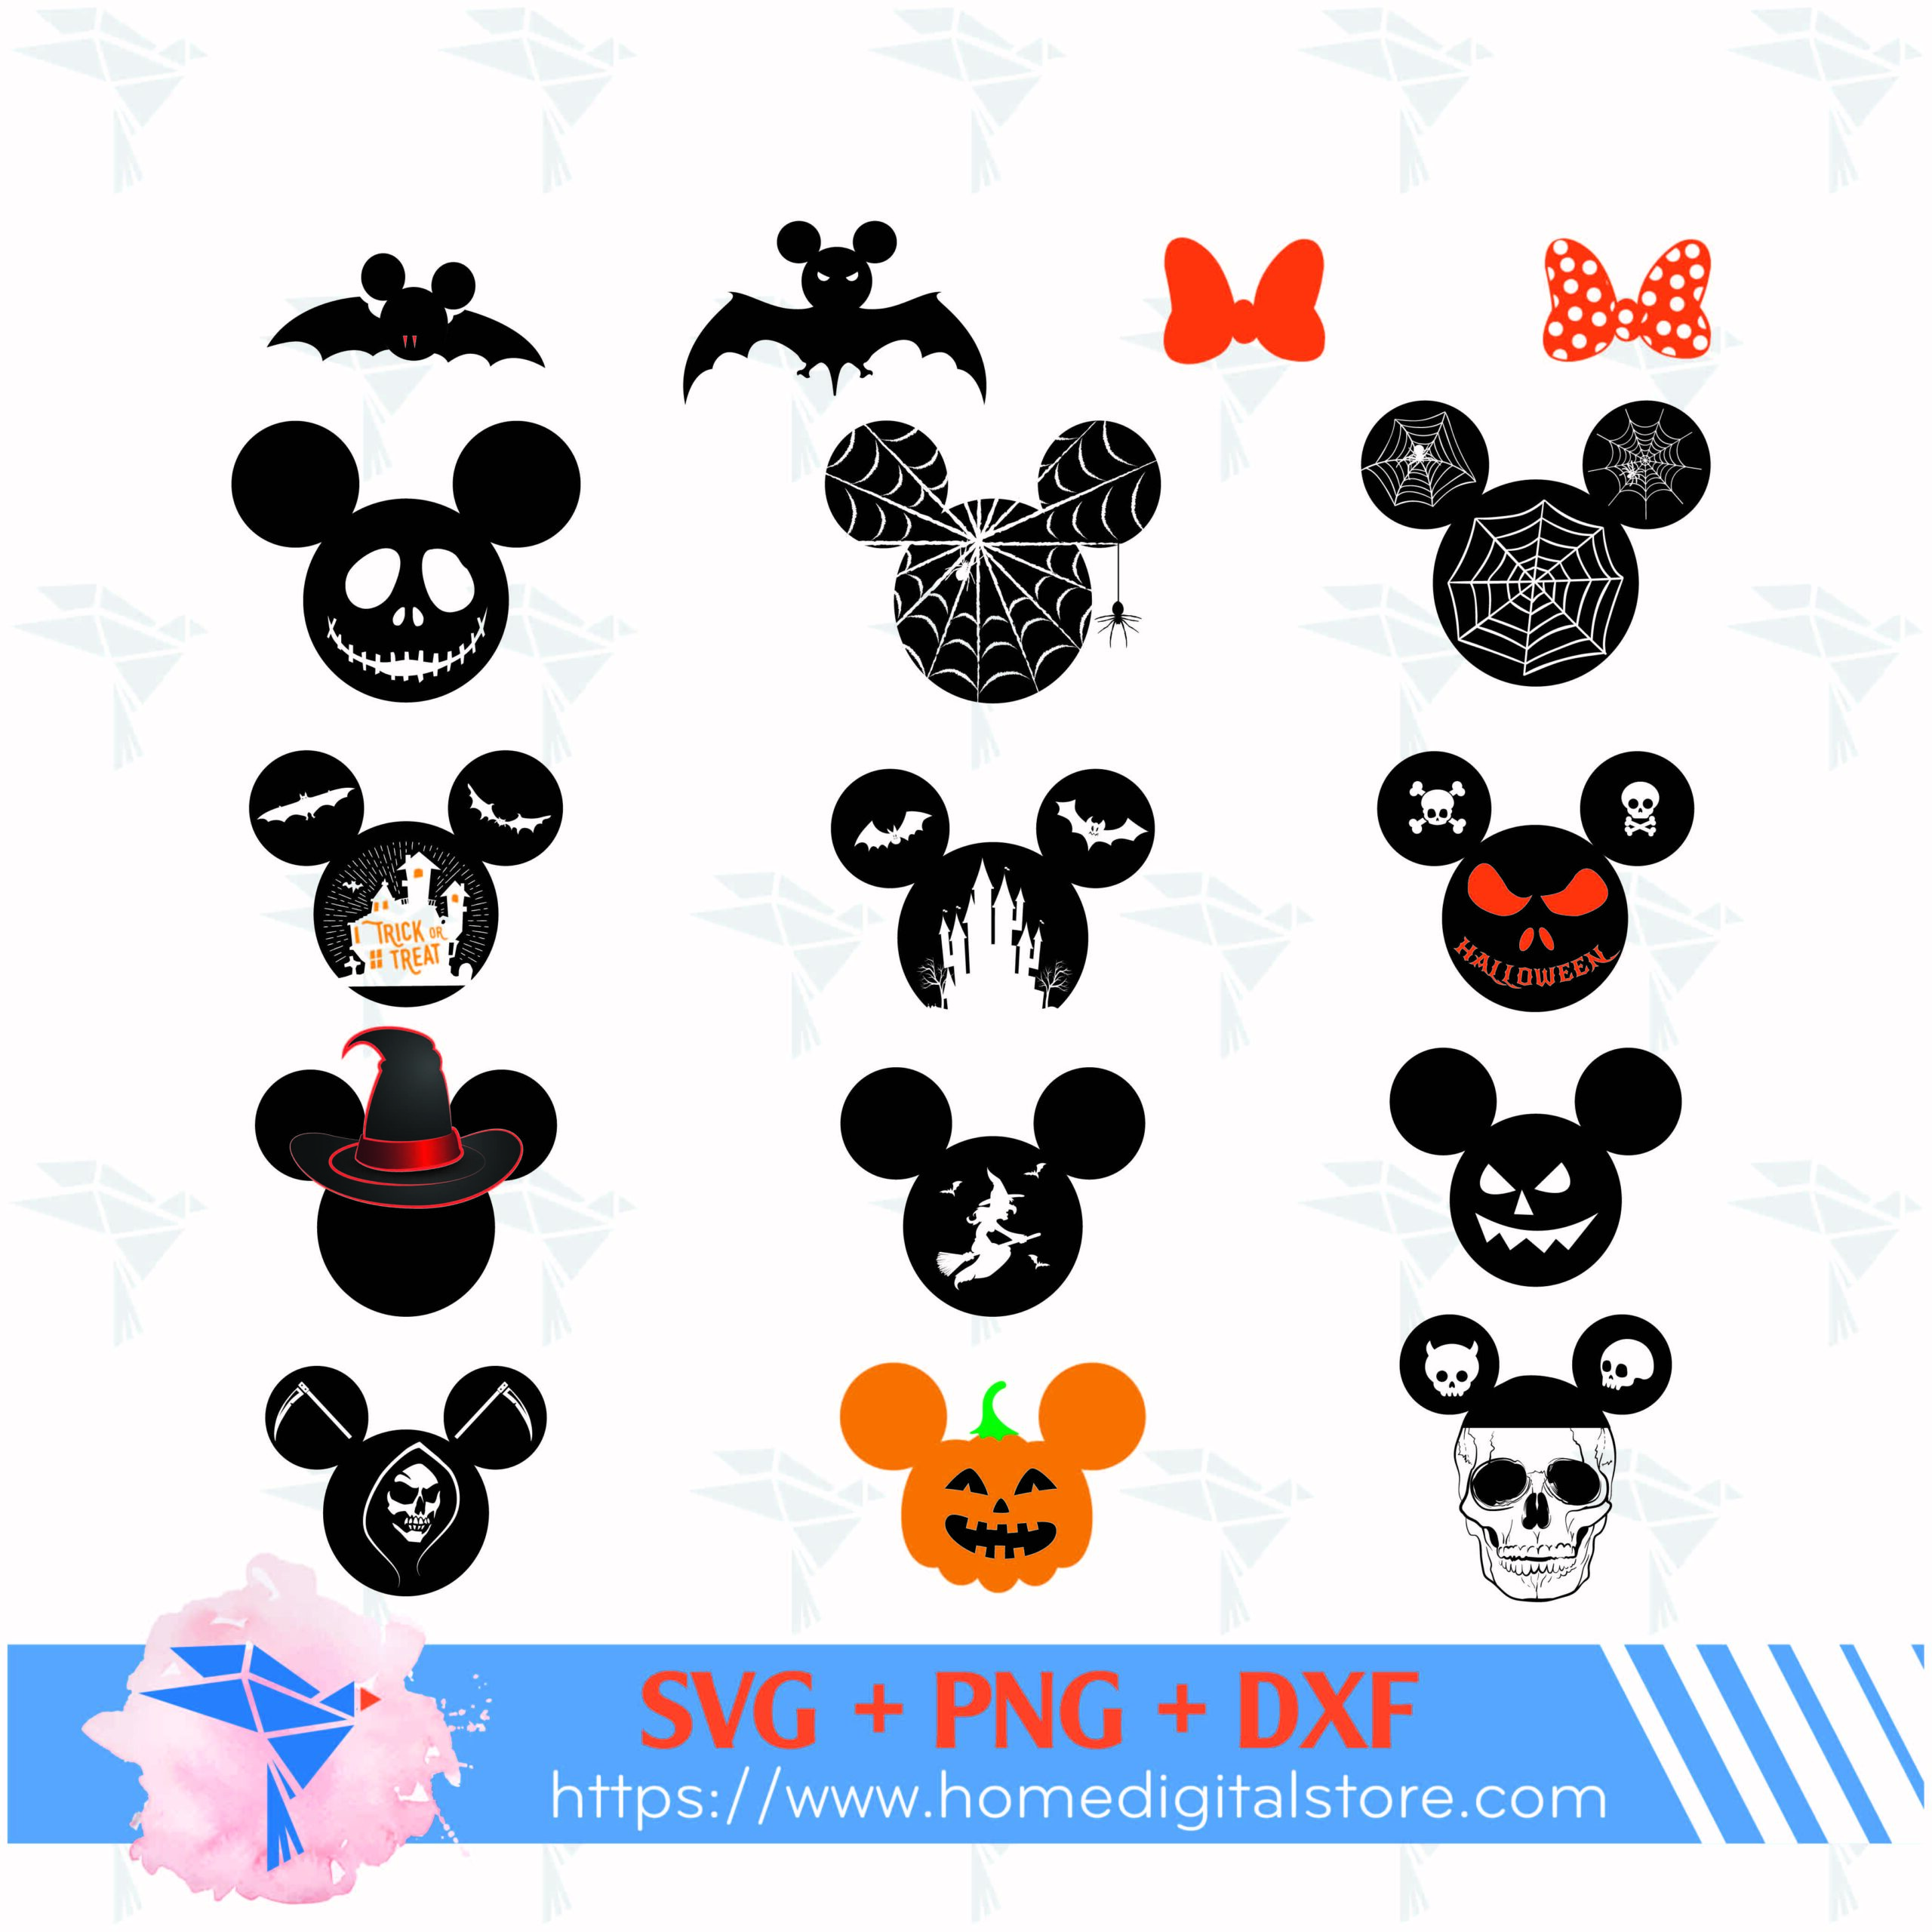 Mickey Mouse Clubhouse| Instant Download| Transparent Background| 41 PNG  Images| Digital Download| PNG Bundle| Mickey Mouse| Mickey| Clipart